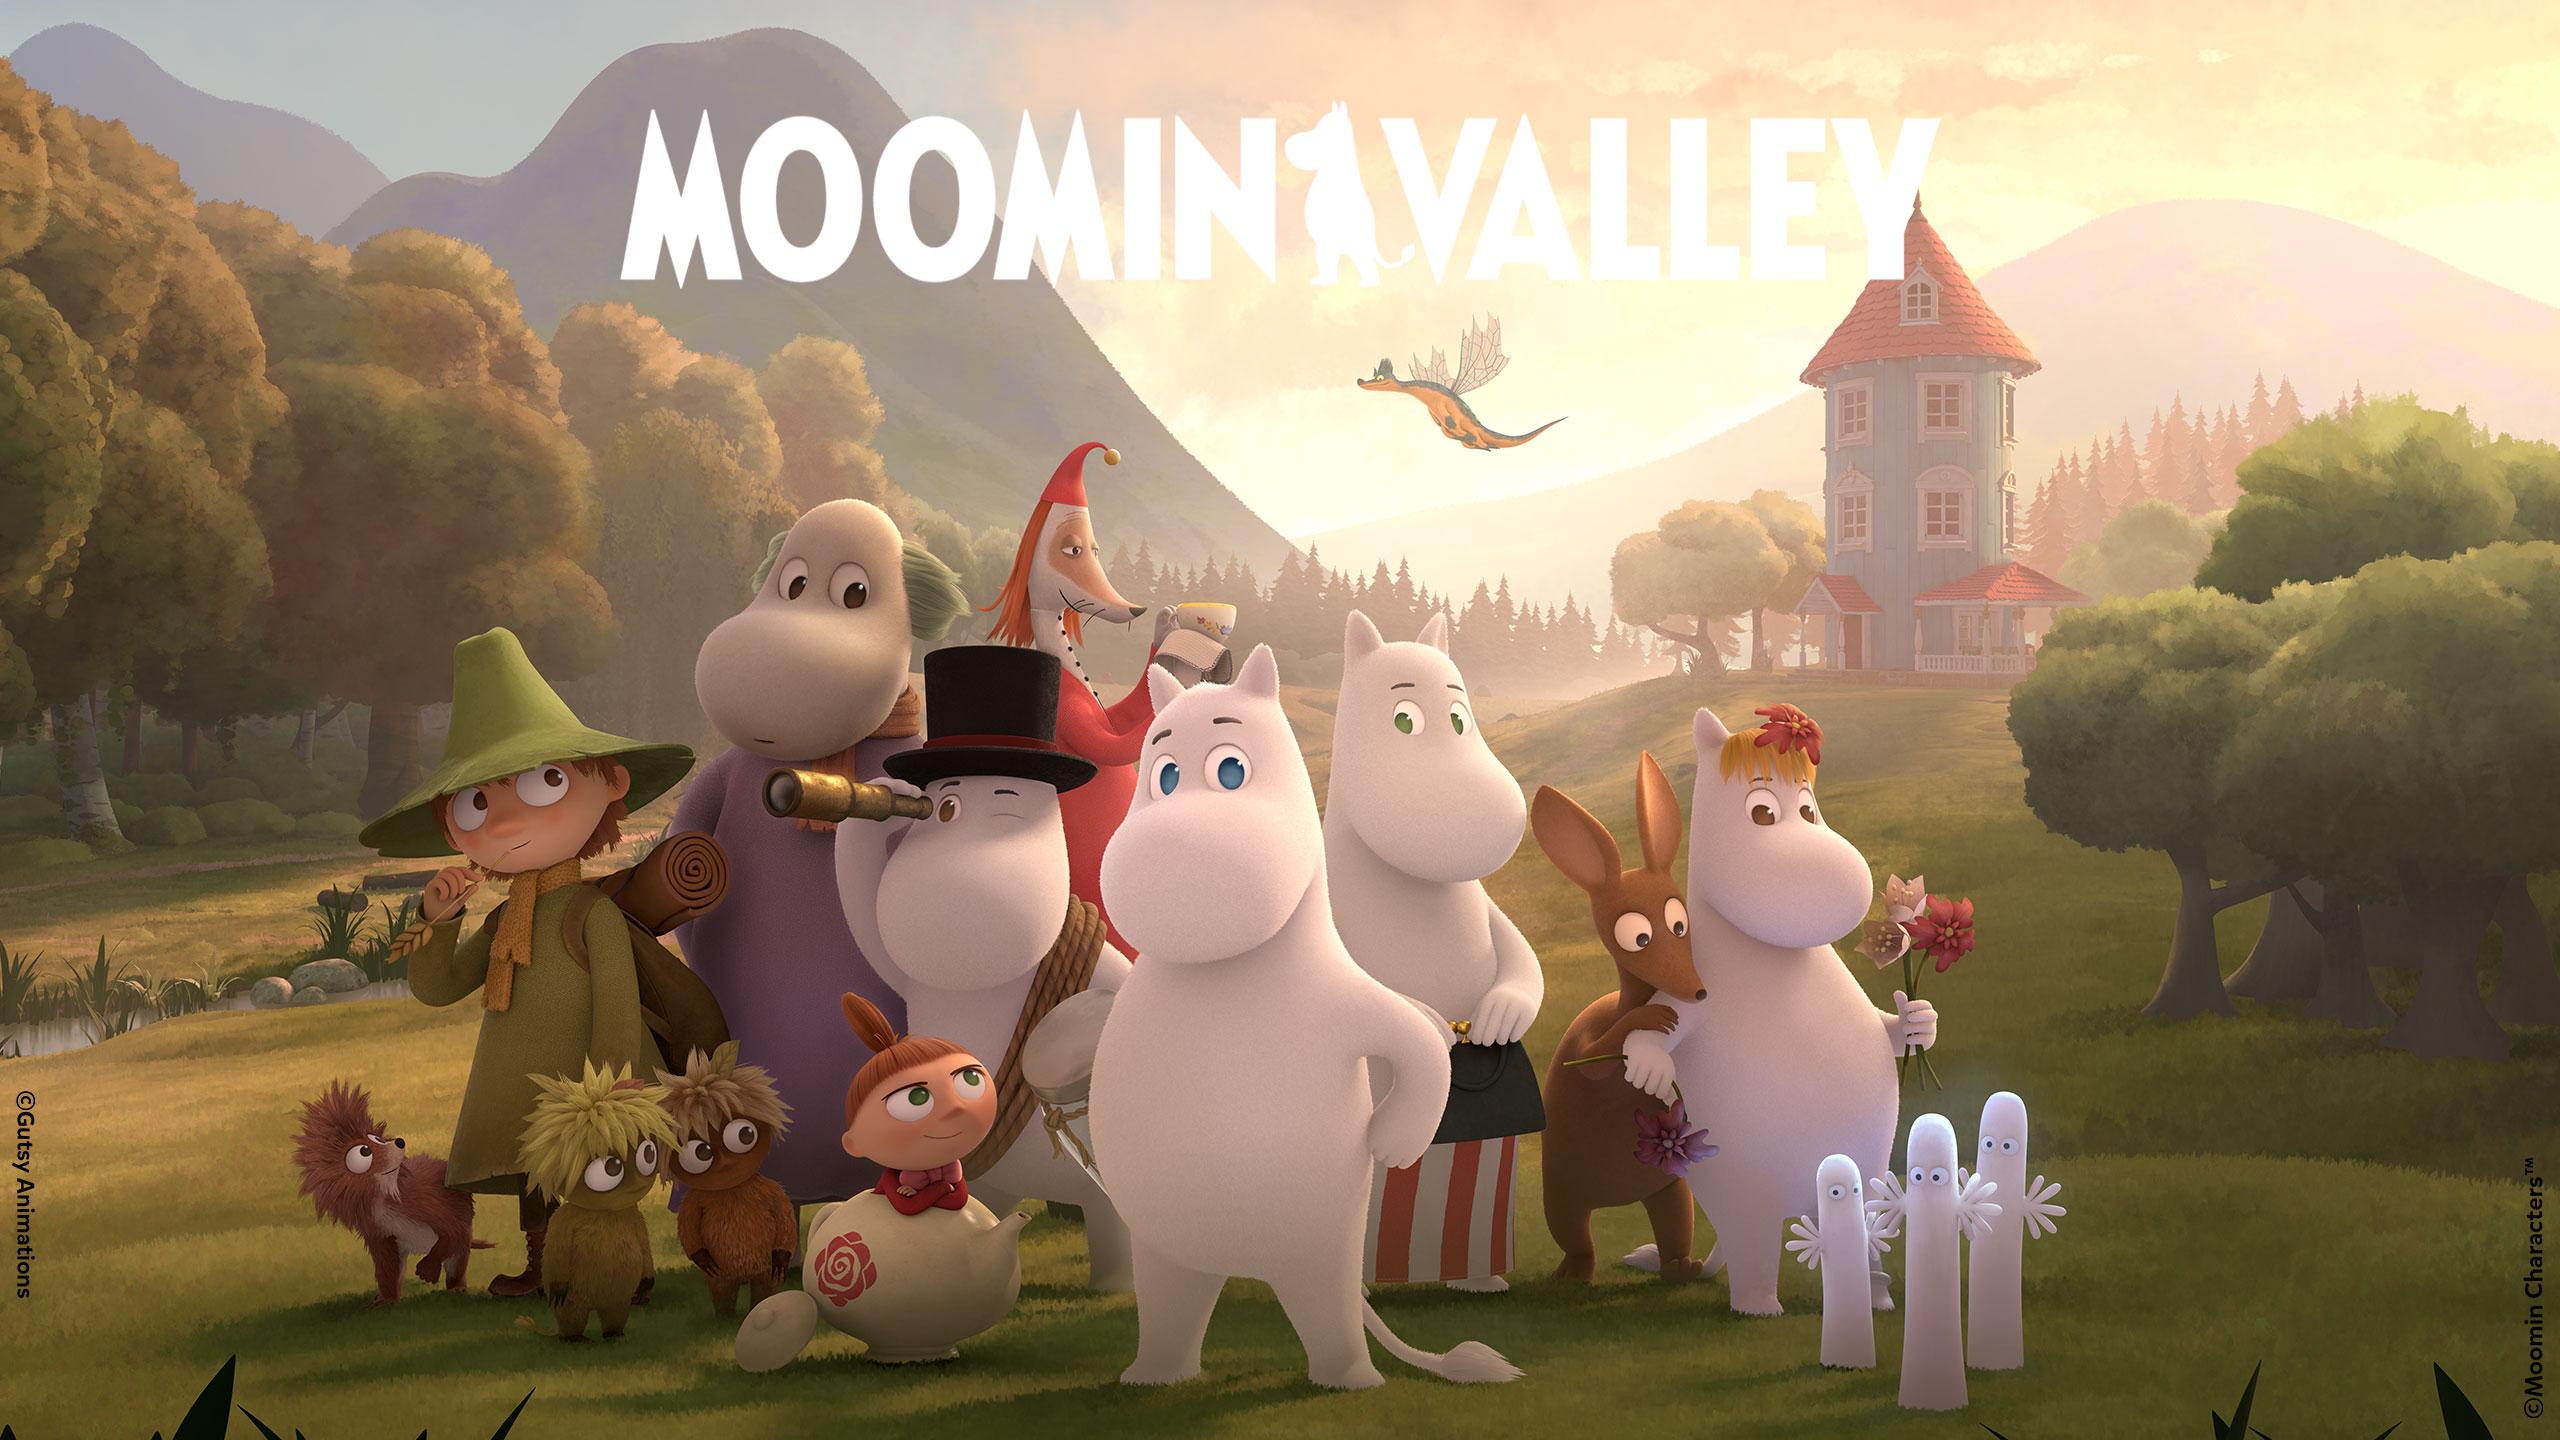 The Moominvalley TV series available for free as